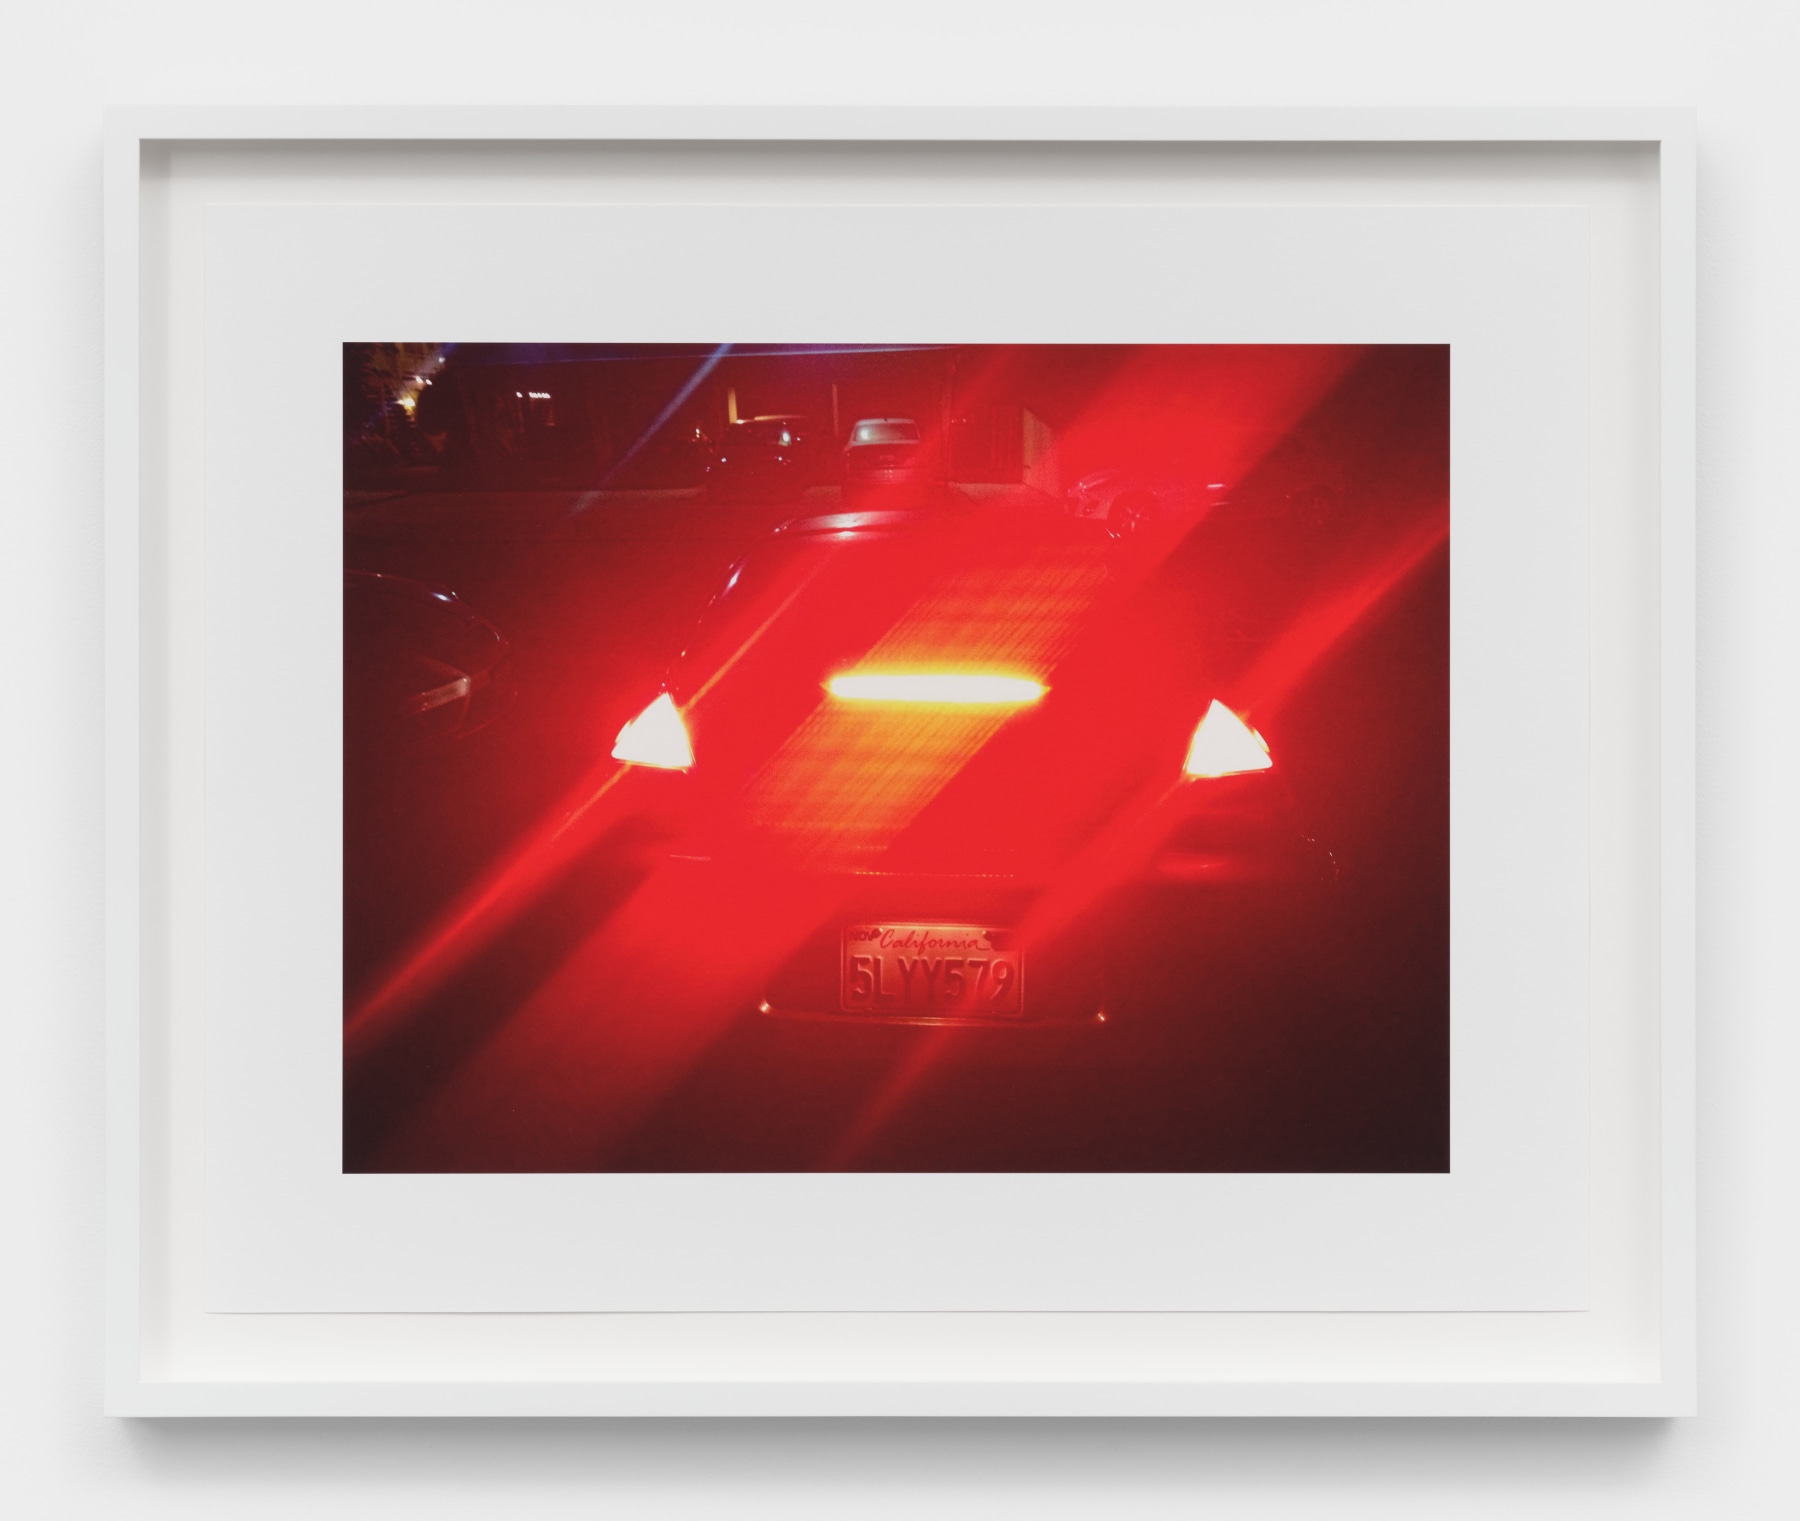 A photograph of a car with its rear brake lights engaged and refracting across the image. 